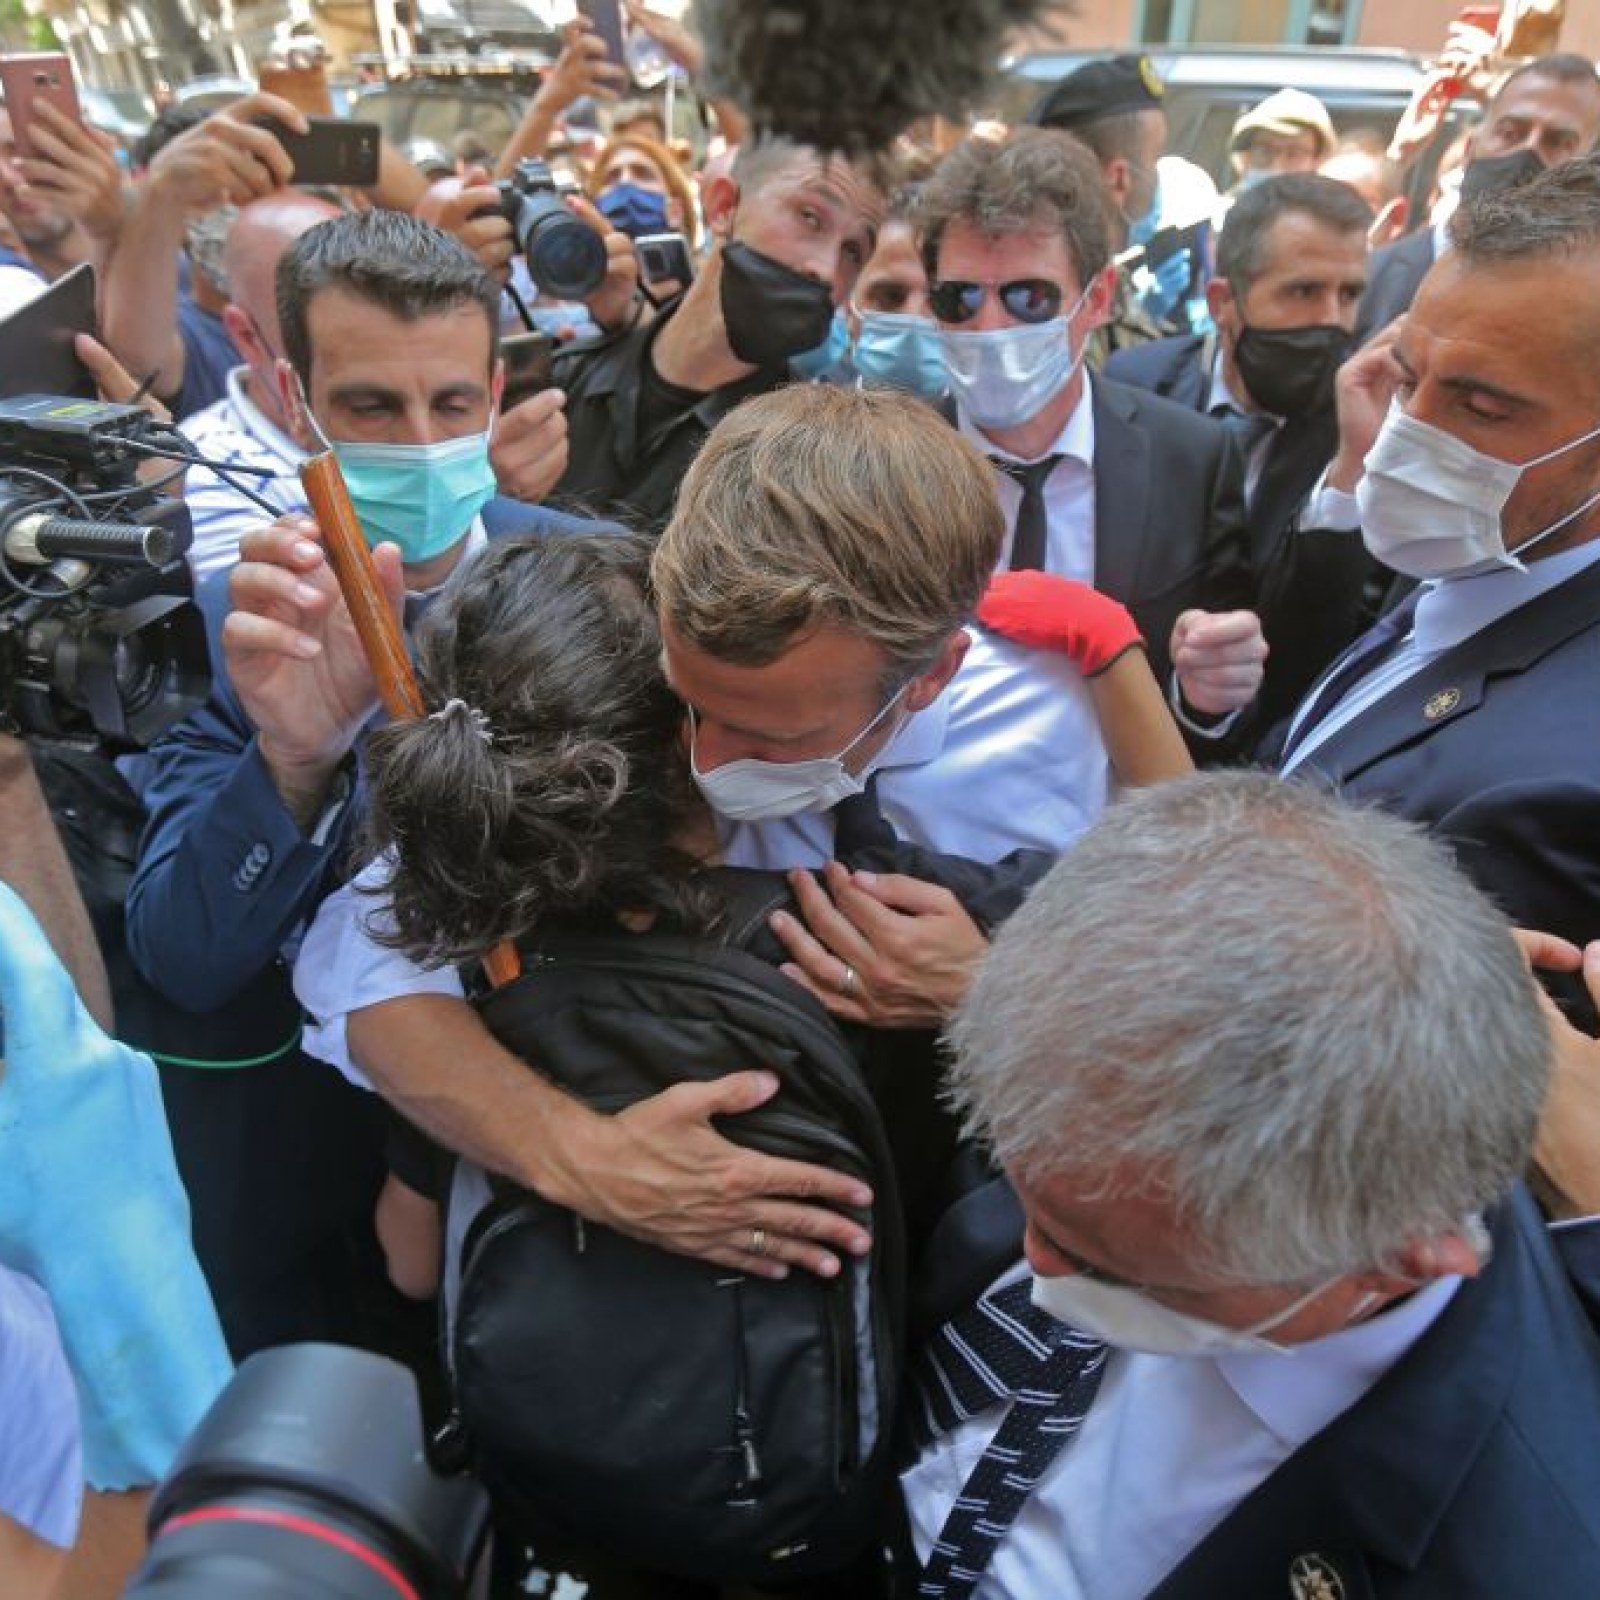 Emmanuel Macron in Beirut: He walked the streets. People surrounded and hugged him and asked for help in changing Lebanon's conditions